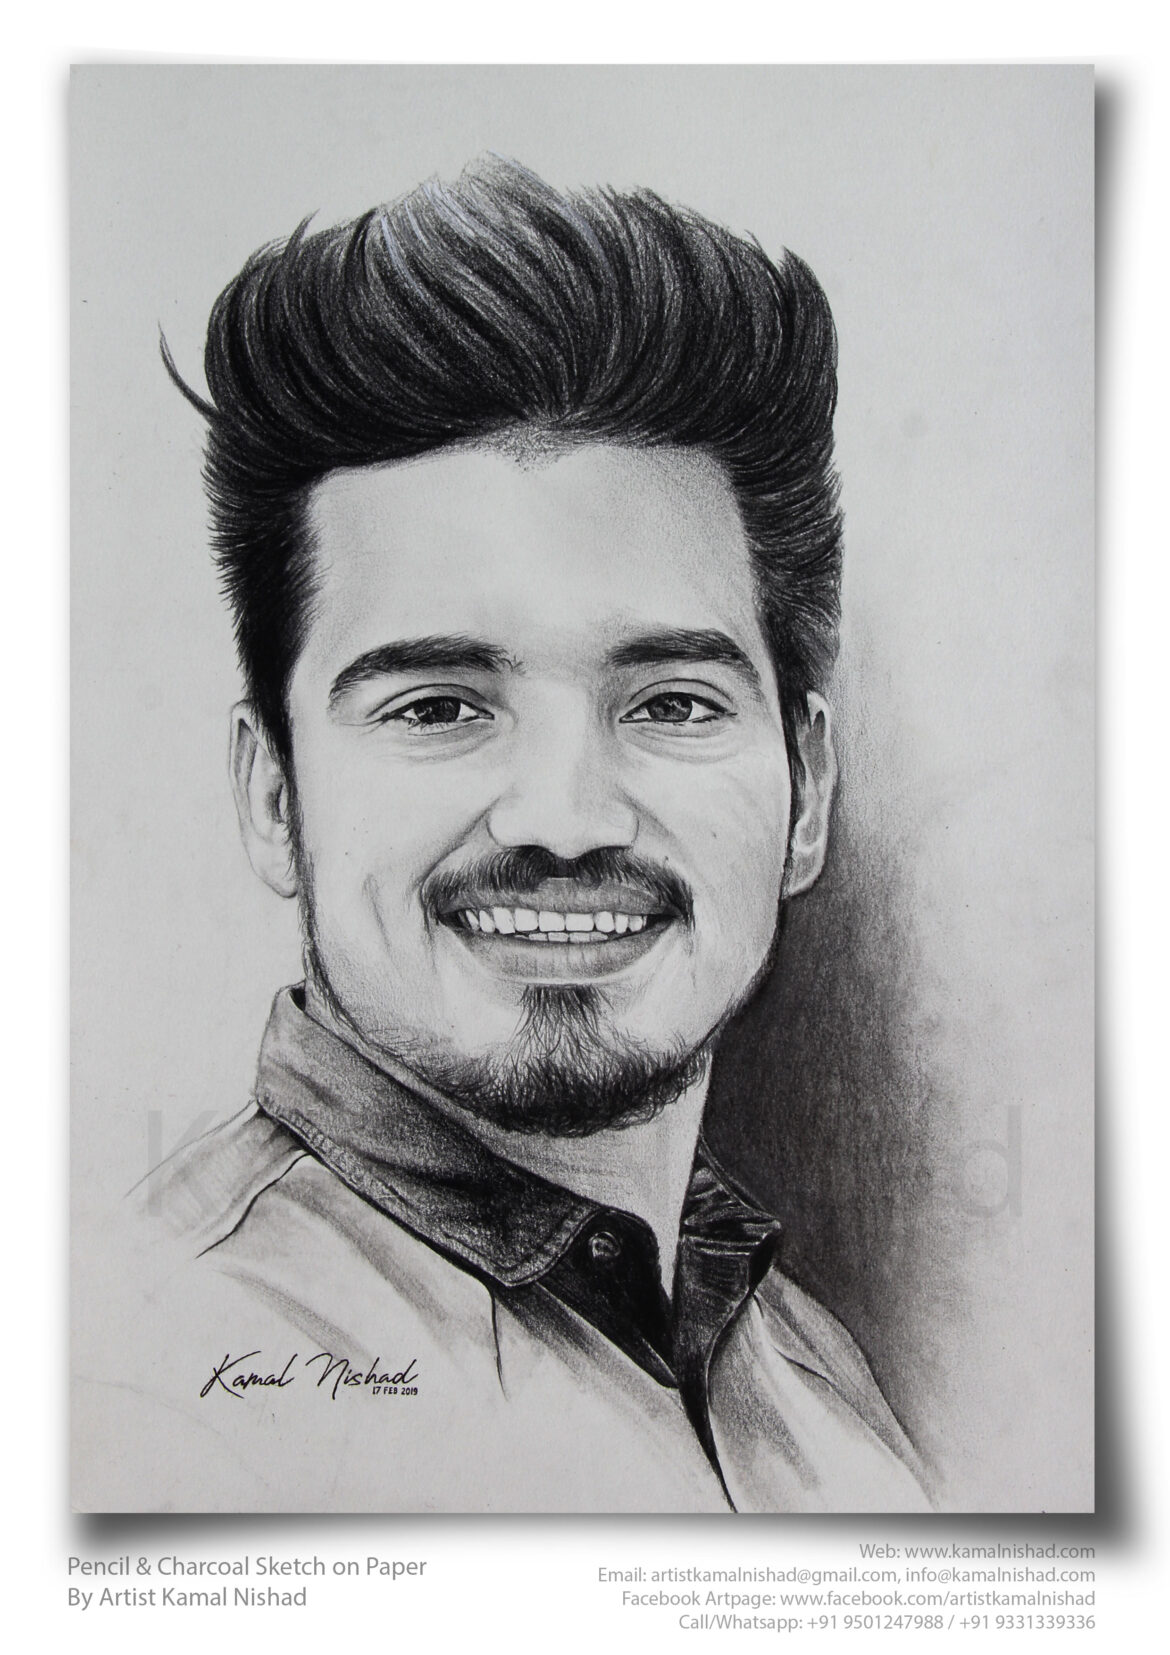 BABALDEEP SIDHU | Pencil & Charcoal Sketch This is a Handmade Sketch made with Pencil & Charcoal “BABALDEEP SIDHU”. One of my client/customer (FEMALE) wanted me to draw his special friend’s portrait for his friend’s birthday present. So I did this sketch for her. SIZE: A3 Created by © Kamal Nishad. All rights reserved.